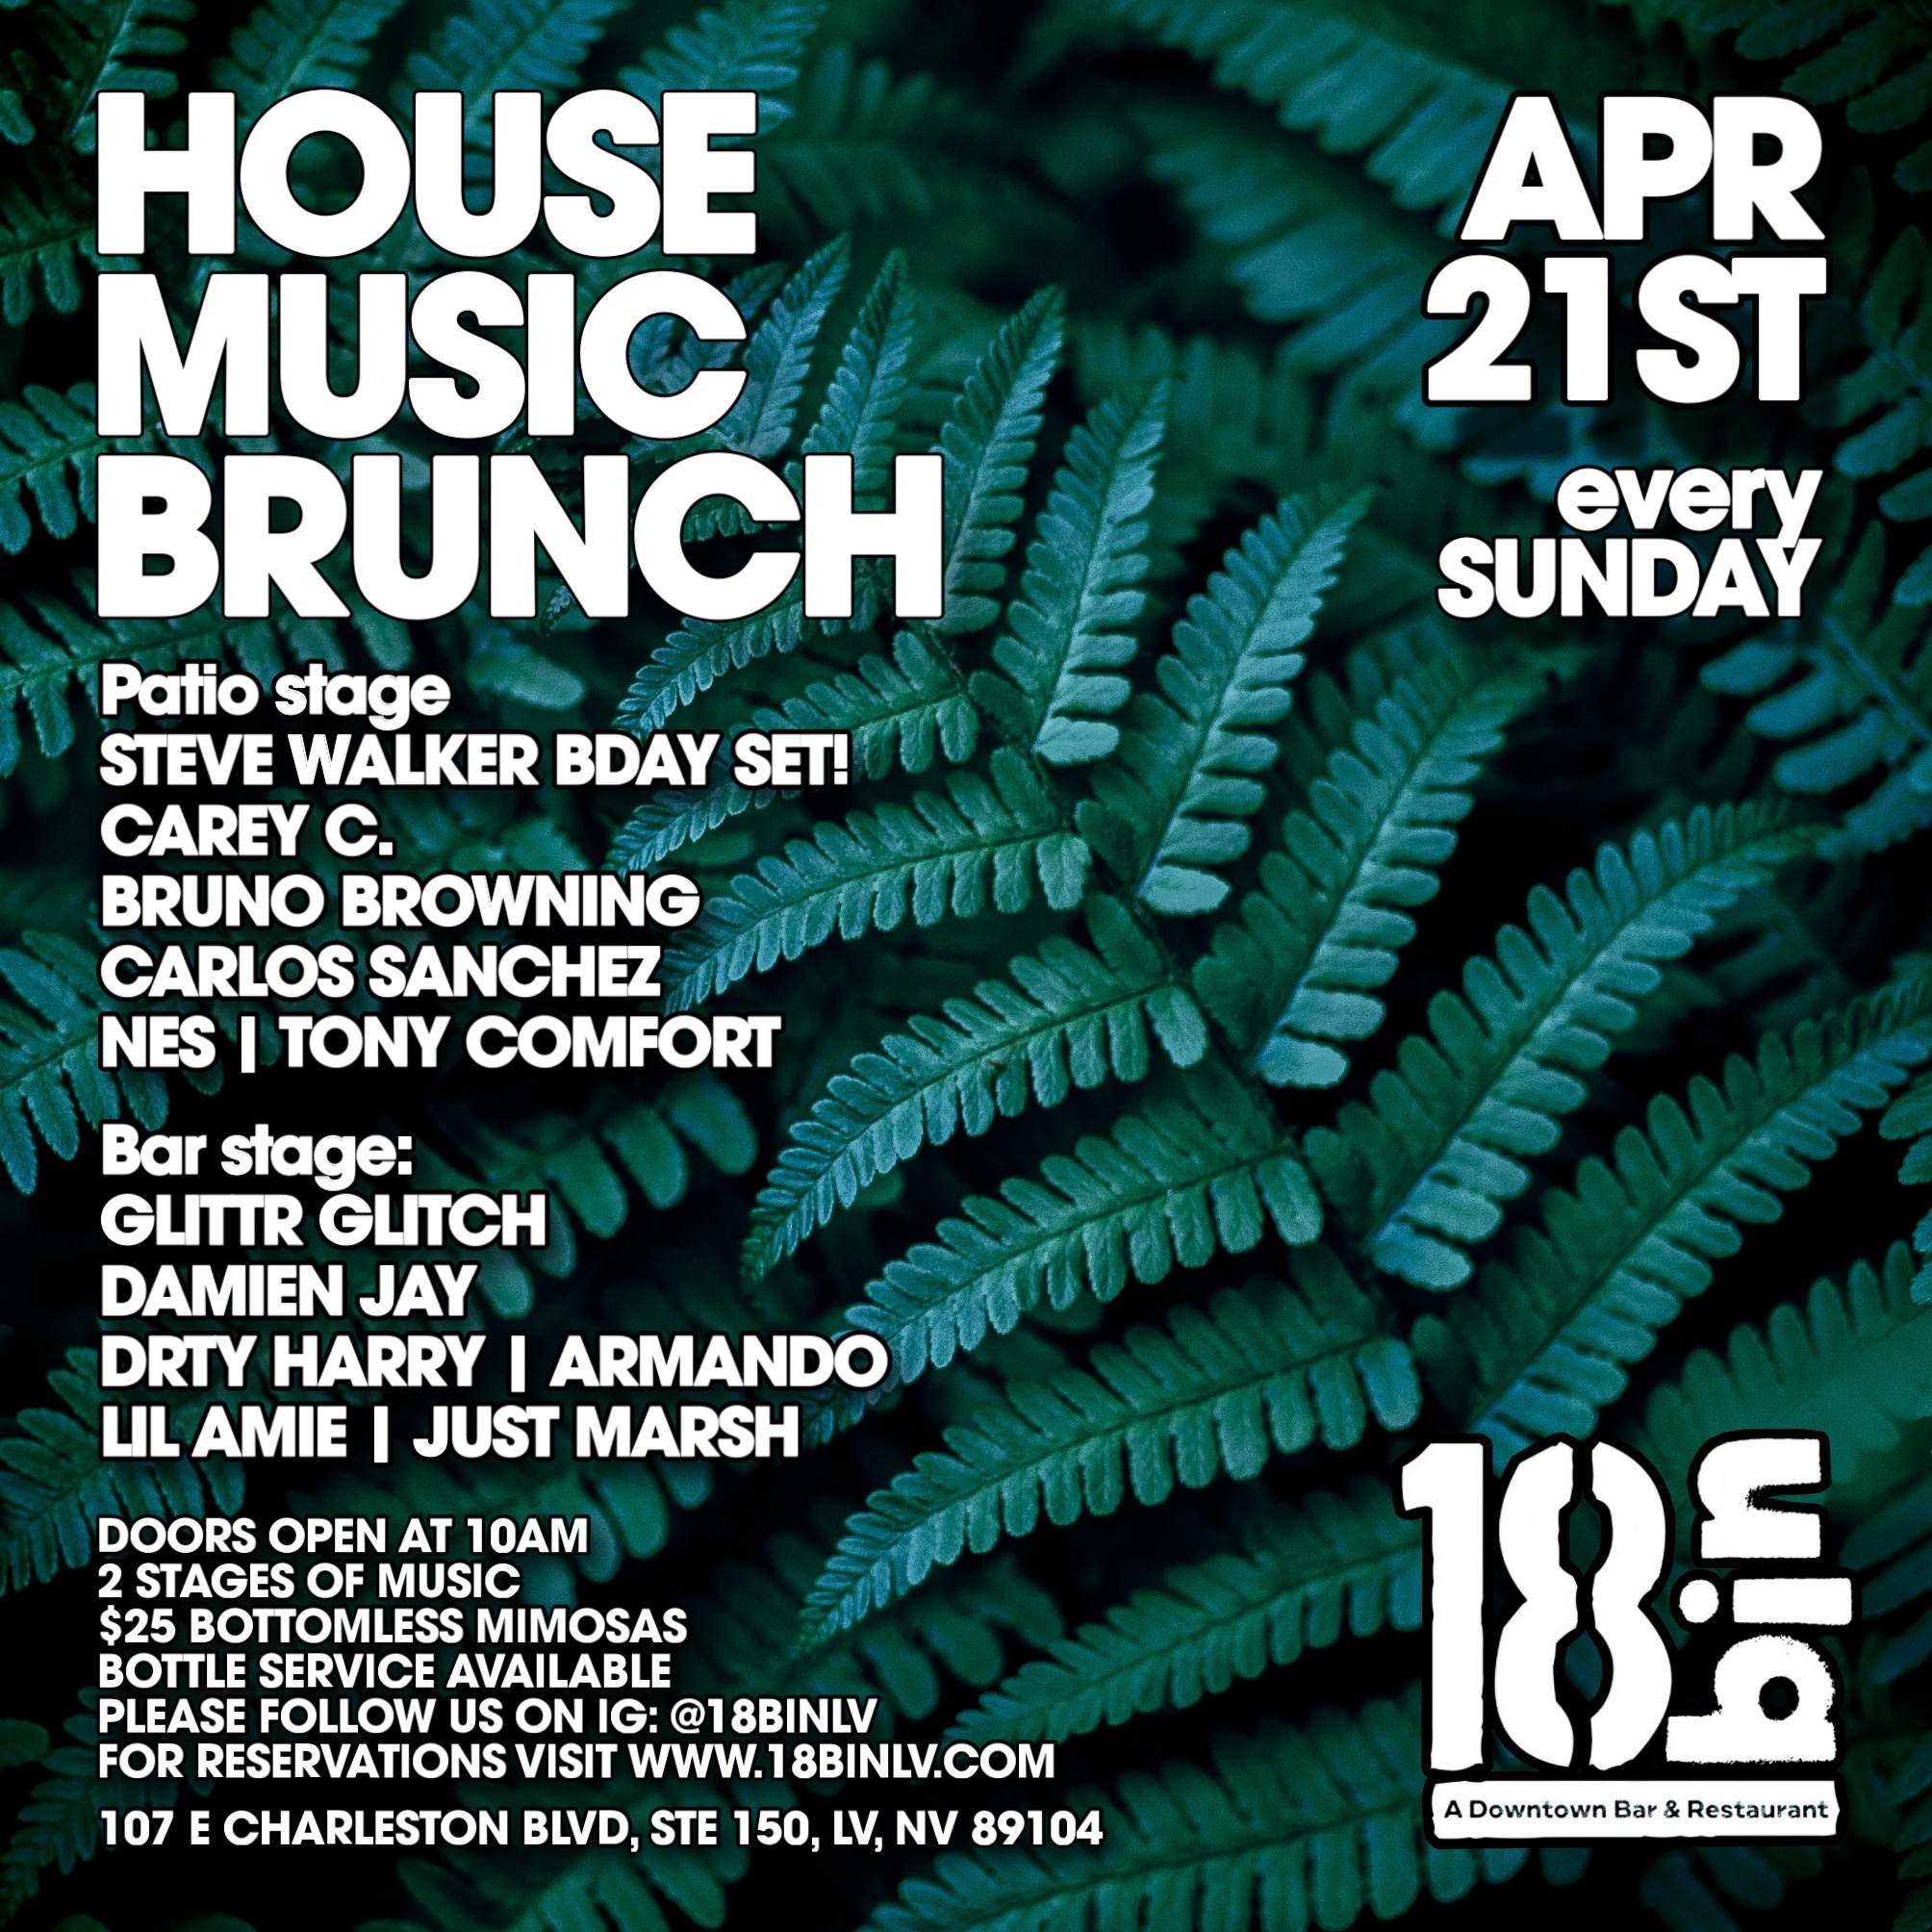 HOUSE MUSIC BRUNCH in the Arts District LV - Página trasera